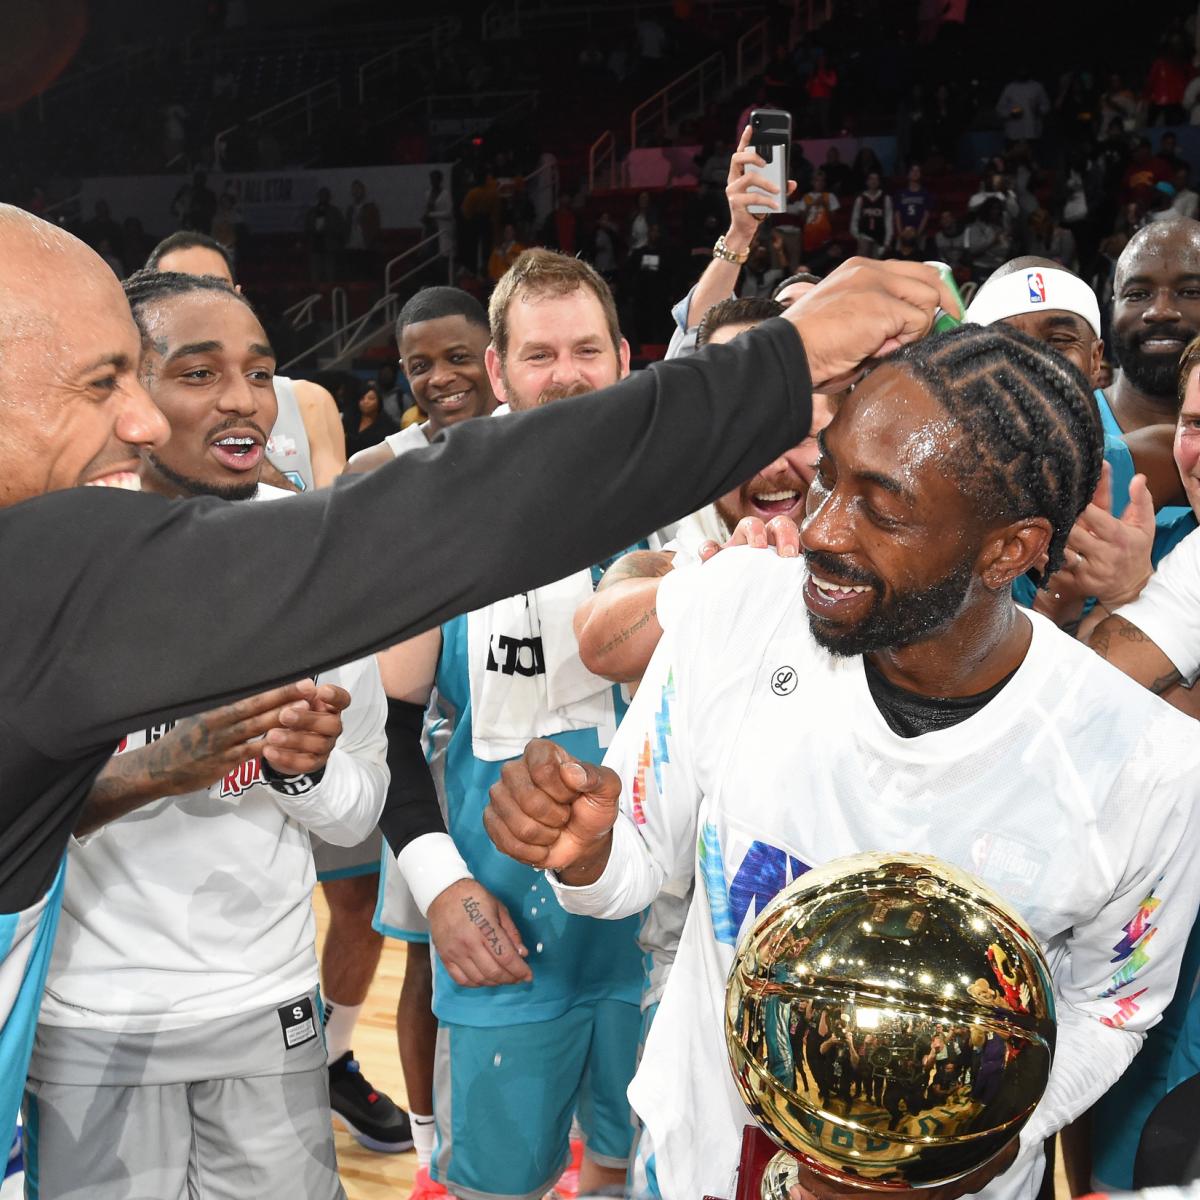 NBA Celebrity AllStar Game 2019 Final Score, Highlights and Comments